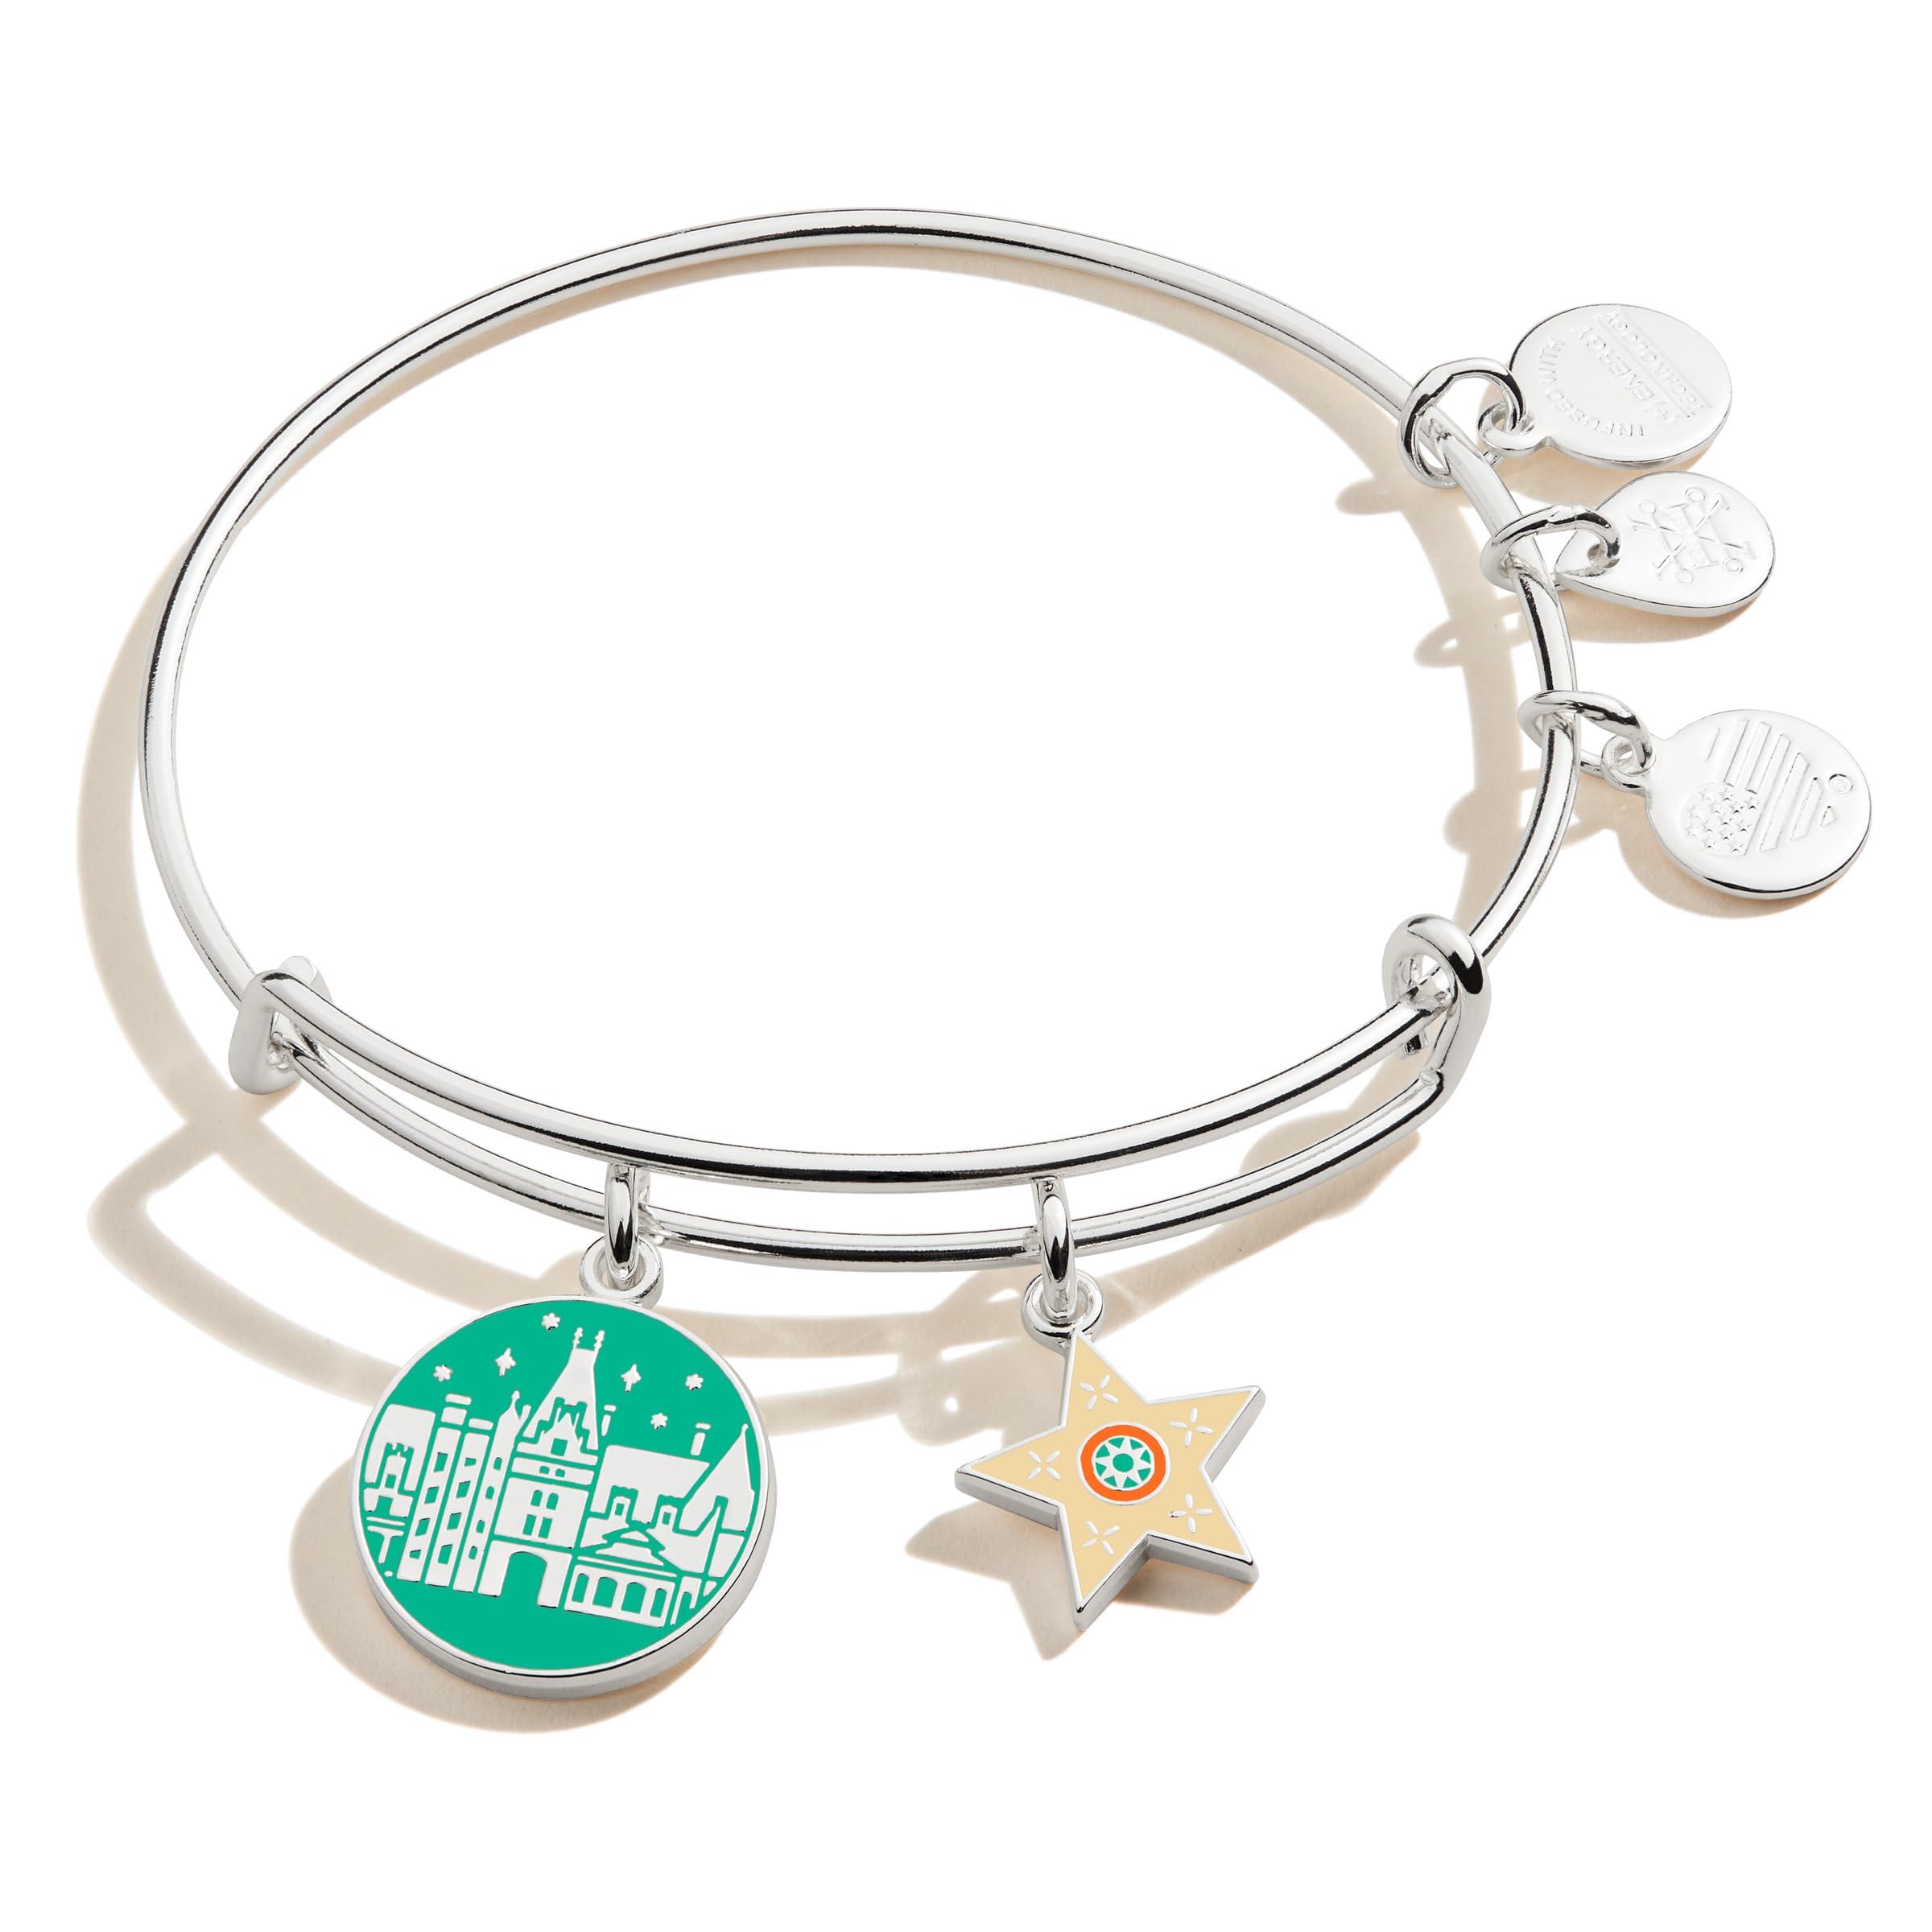 alex and ani Shiny Silver As20ebholbltssbiltmore Estate Holiday Duo Charm Expandable Bangle Braceletshiny Silvergreen